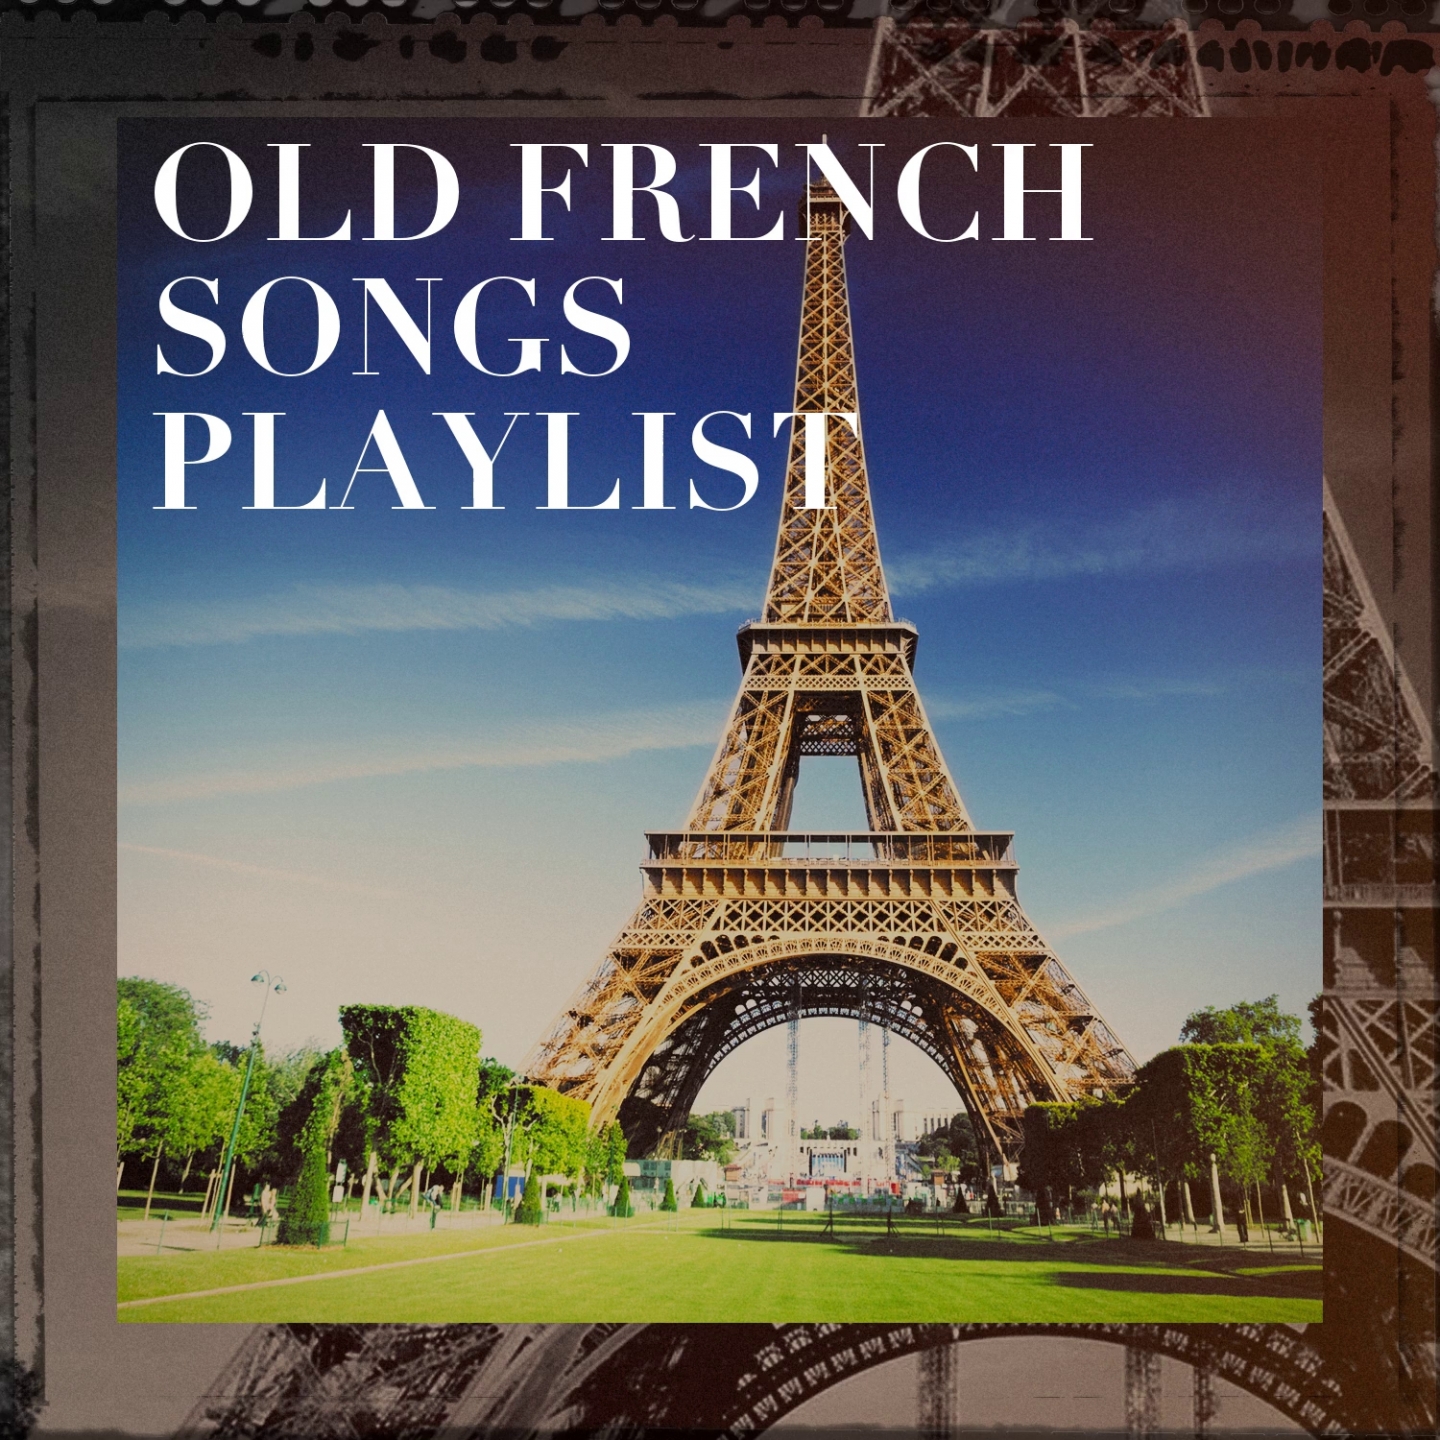 Old french songs playlist